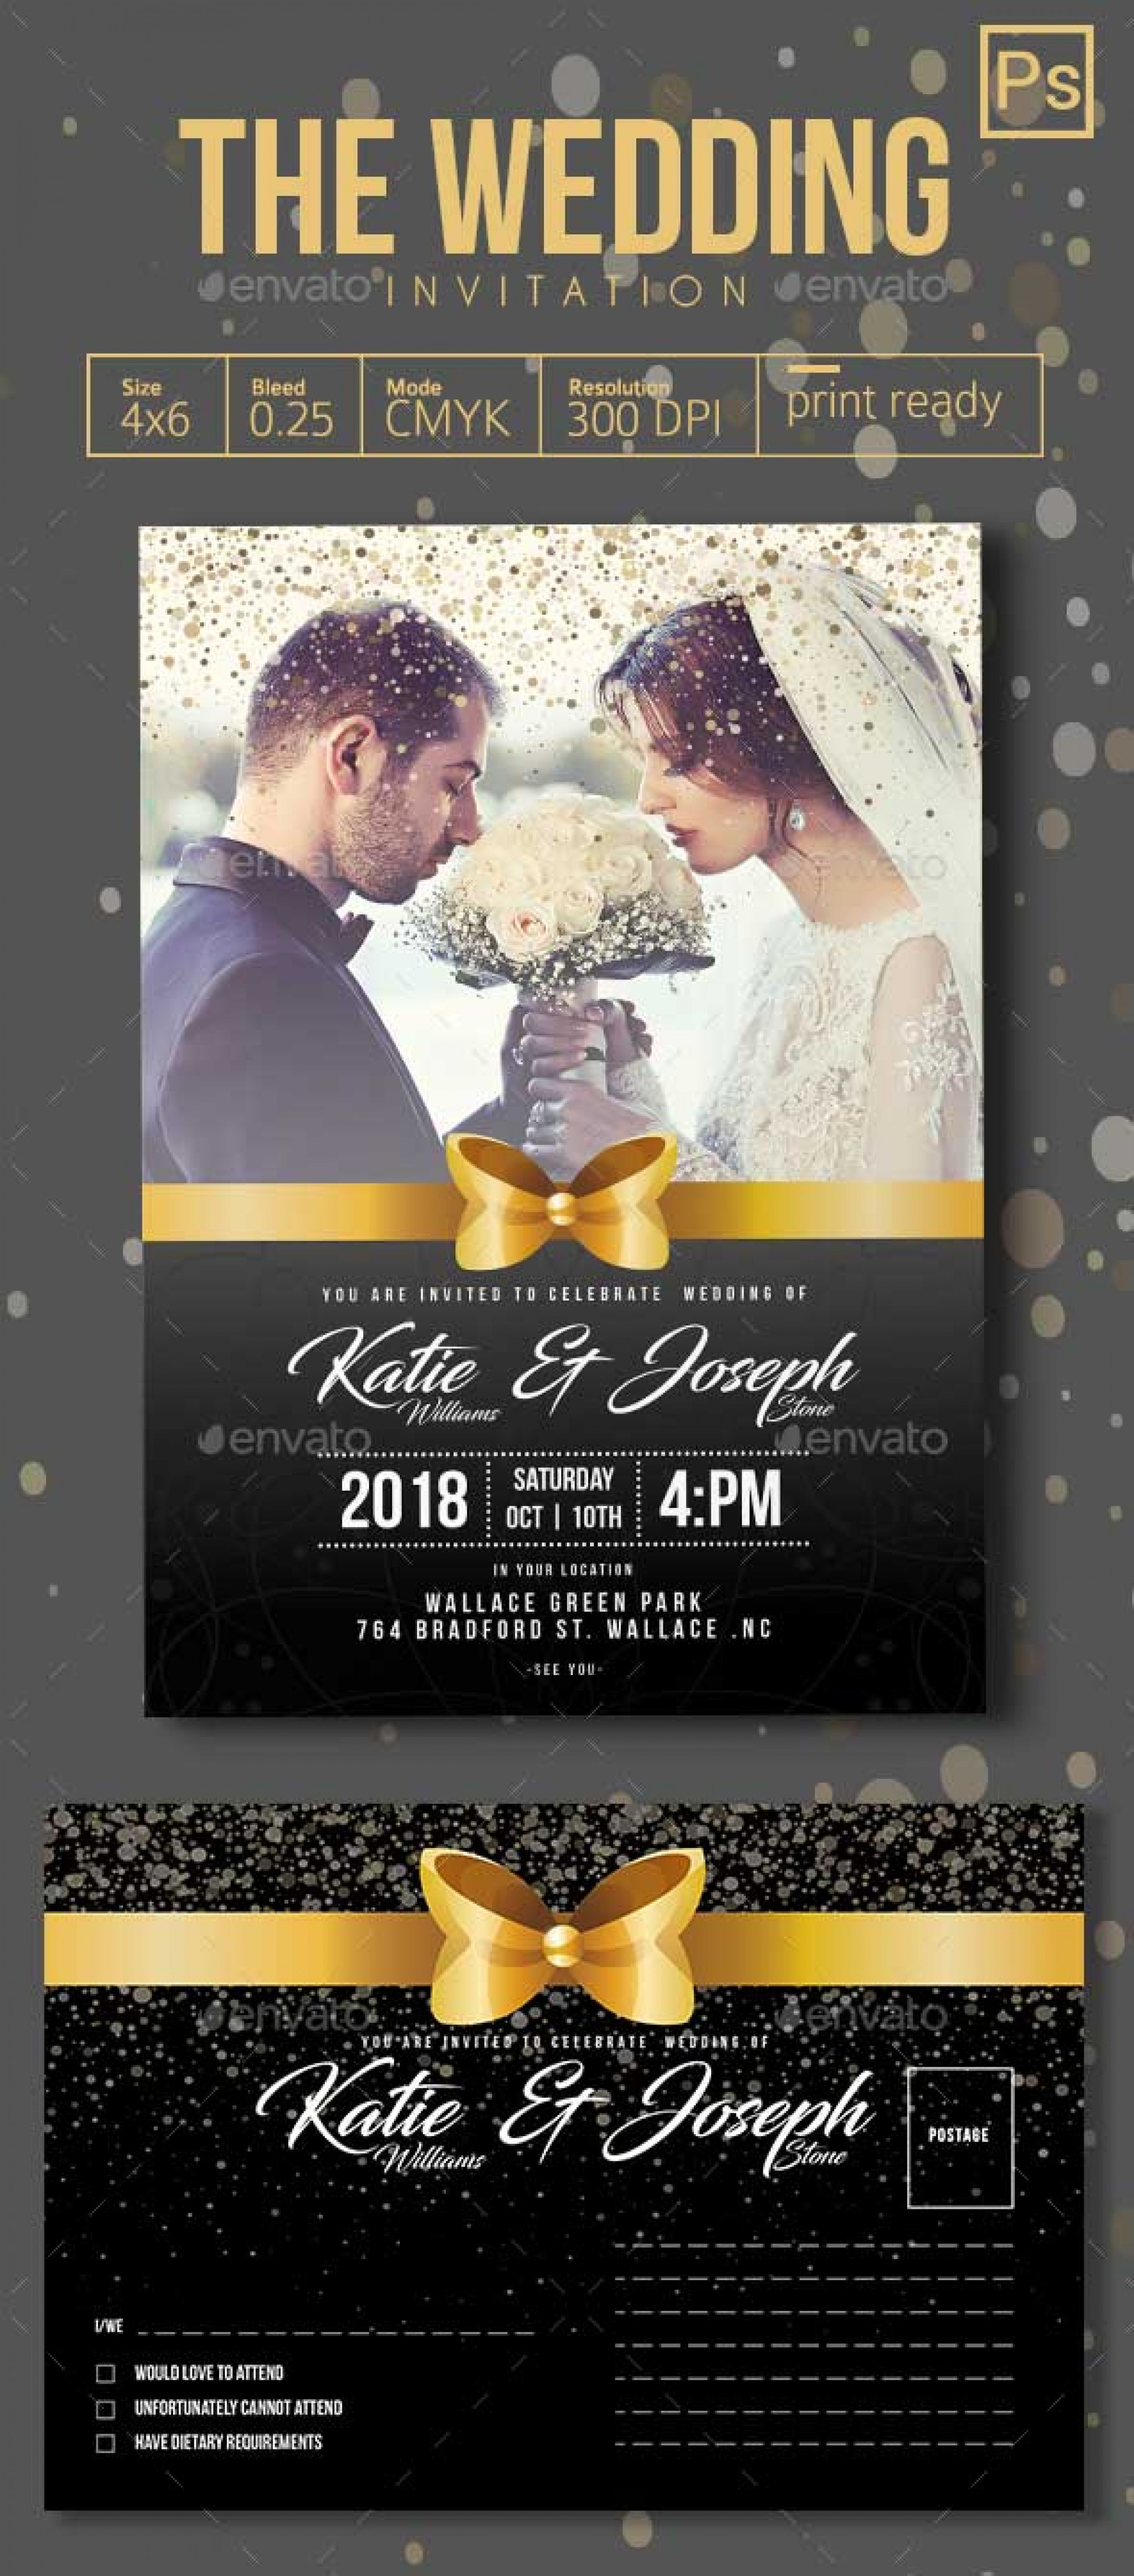 016 The Wedding Invitation Psd Template Download Photoshop Templates with regard to measurements 1920 X 4363